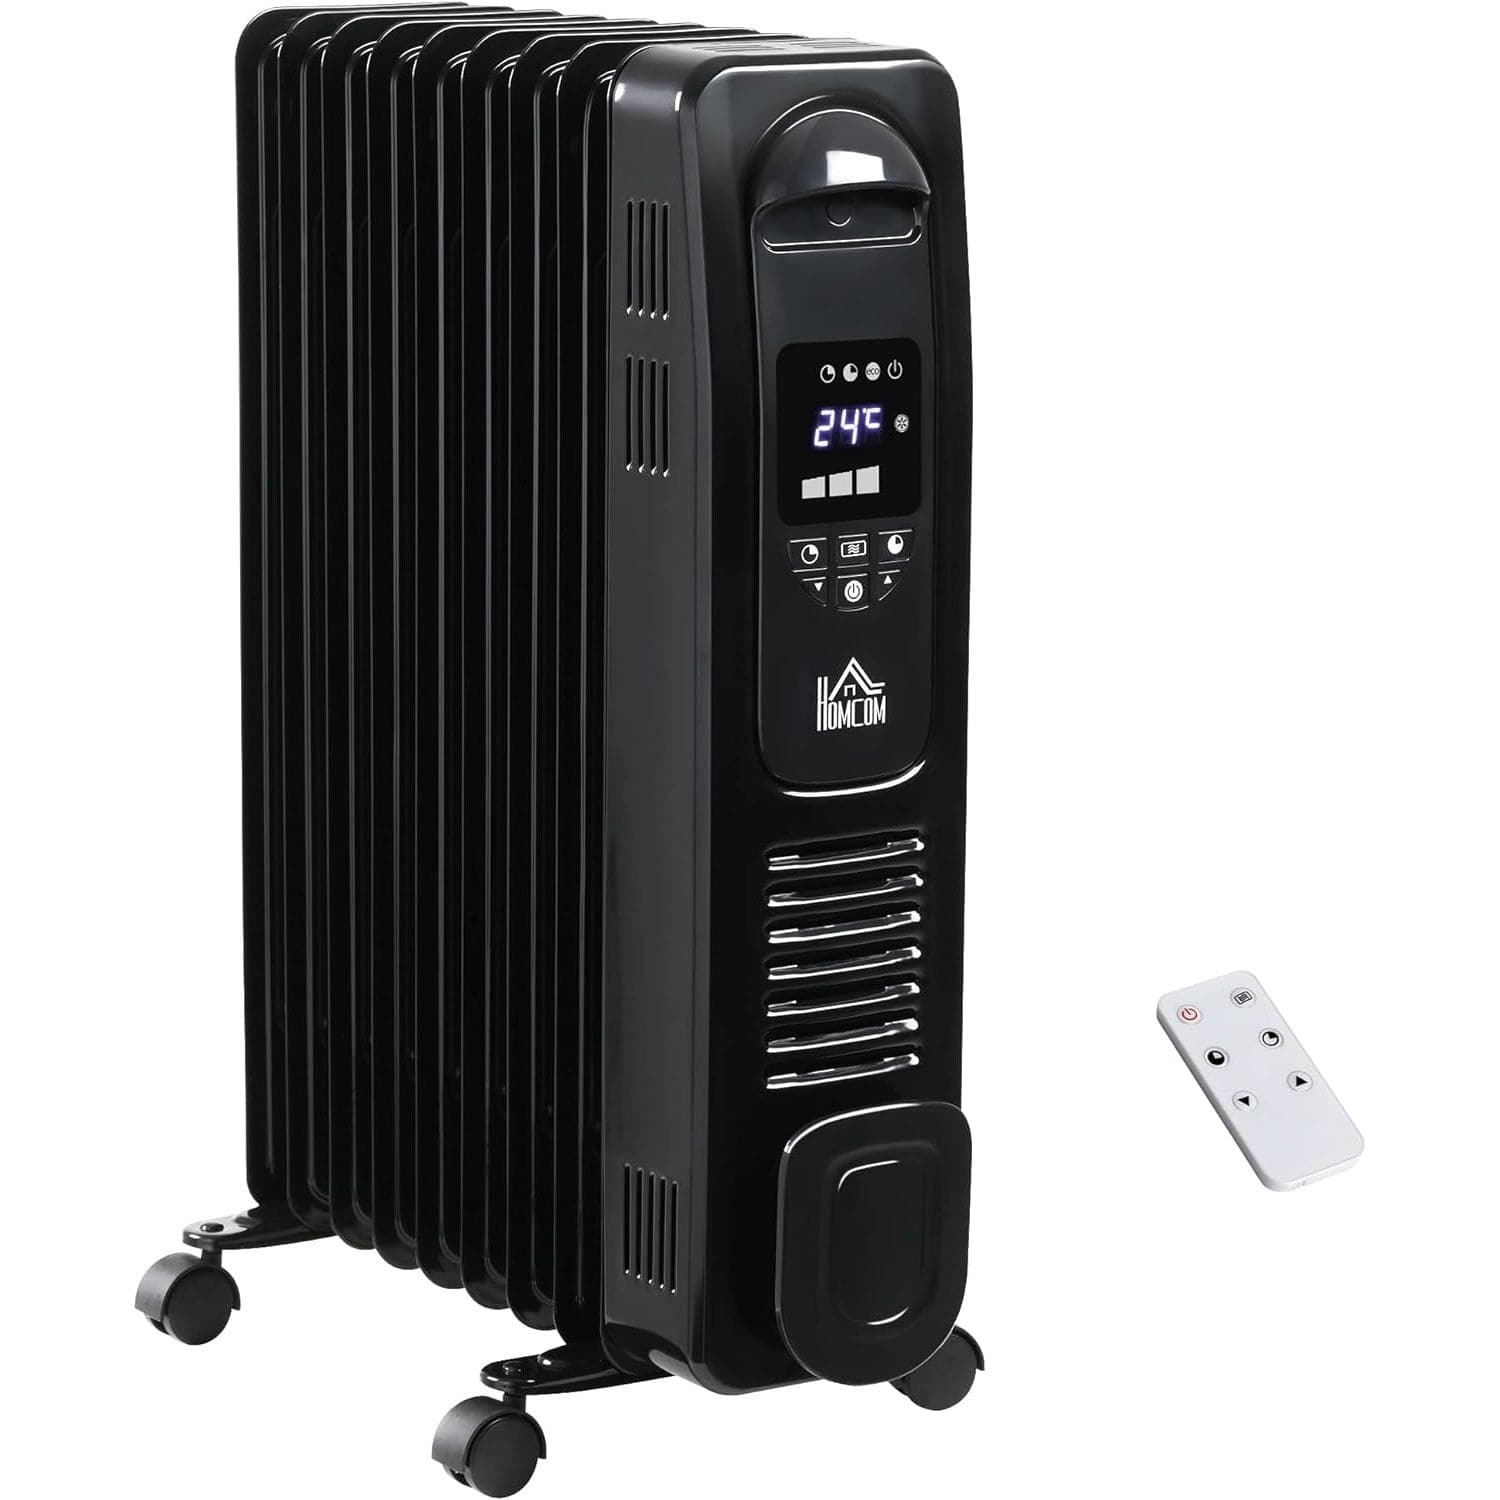 Maplin 2180W Digital 9 Fin Portable Electric Oil Filled Radiator with LED Display, Timer, 3 Heat Settings, Safety Cut-Off & Remote Control (Black)